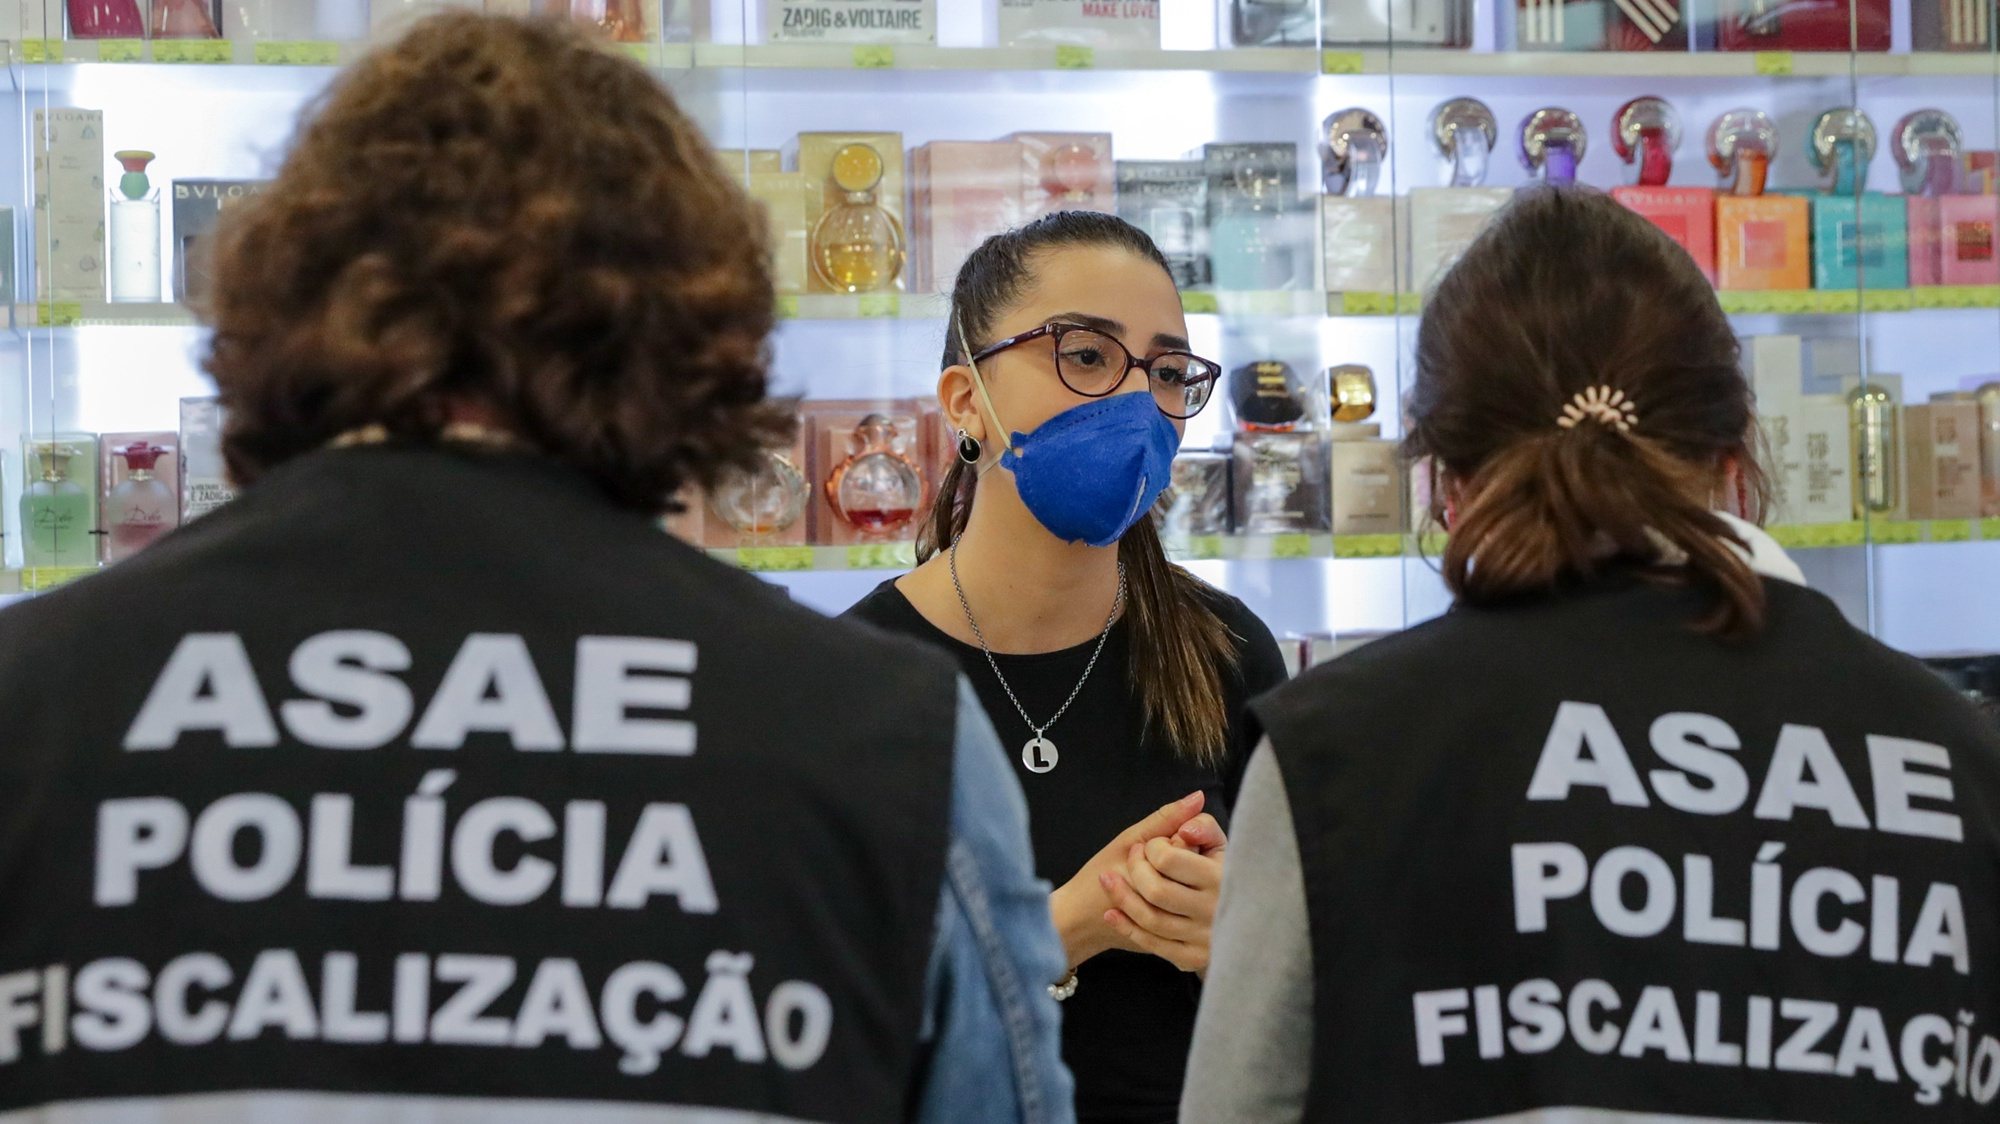 epa08380620 An inspector of Food and Economic Security Authority (ASAE) checks prices and packaging of sanitizer gel and masks at a medical supply store in Moscavide, Loures, Portugal, 23 April 2020. ASAE teams have started a nationwide inspection of the price of protective and cleaning items. Countries around the world are taking increased measures to stem the widespread of the SARS-CoV-2 coronavirus which causes the Covid-19 disease.  EPA/TIAGO PETINGA